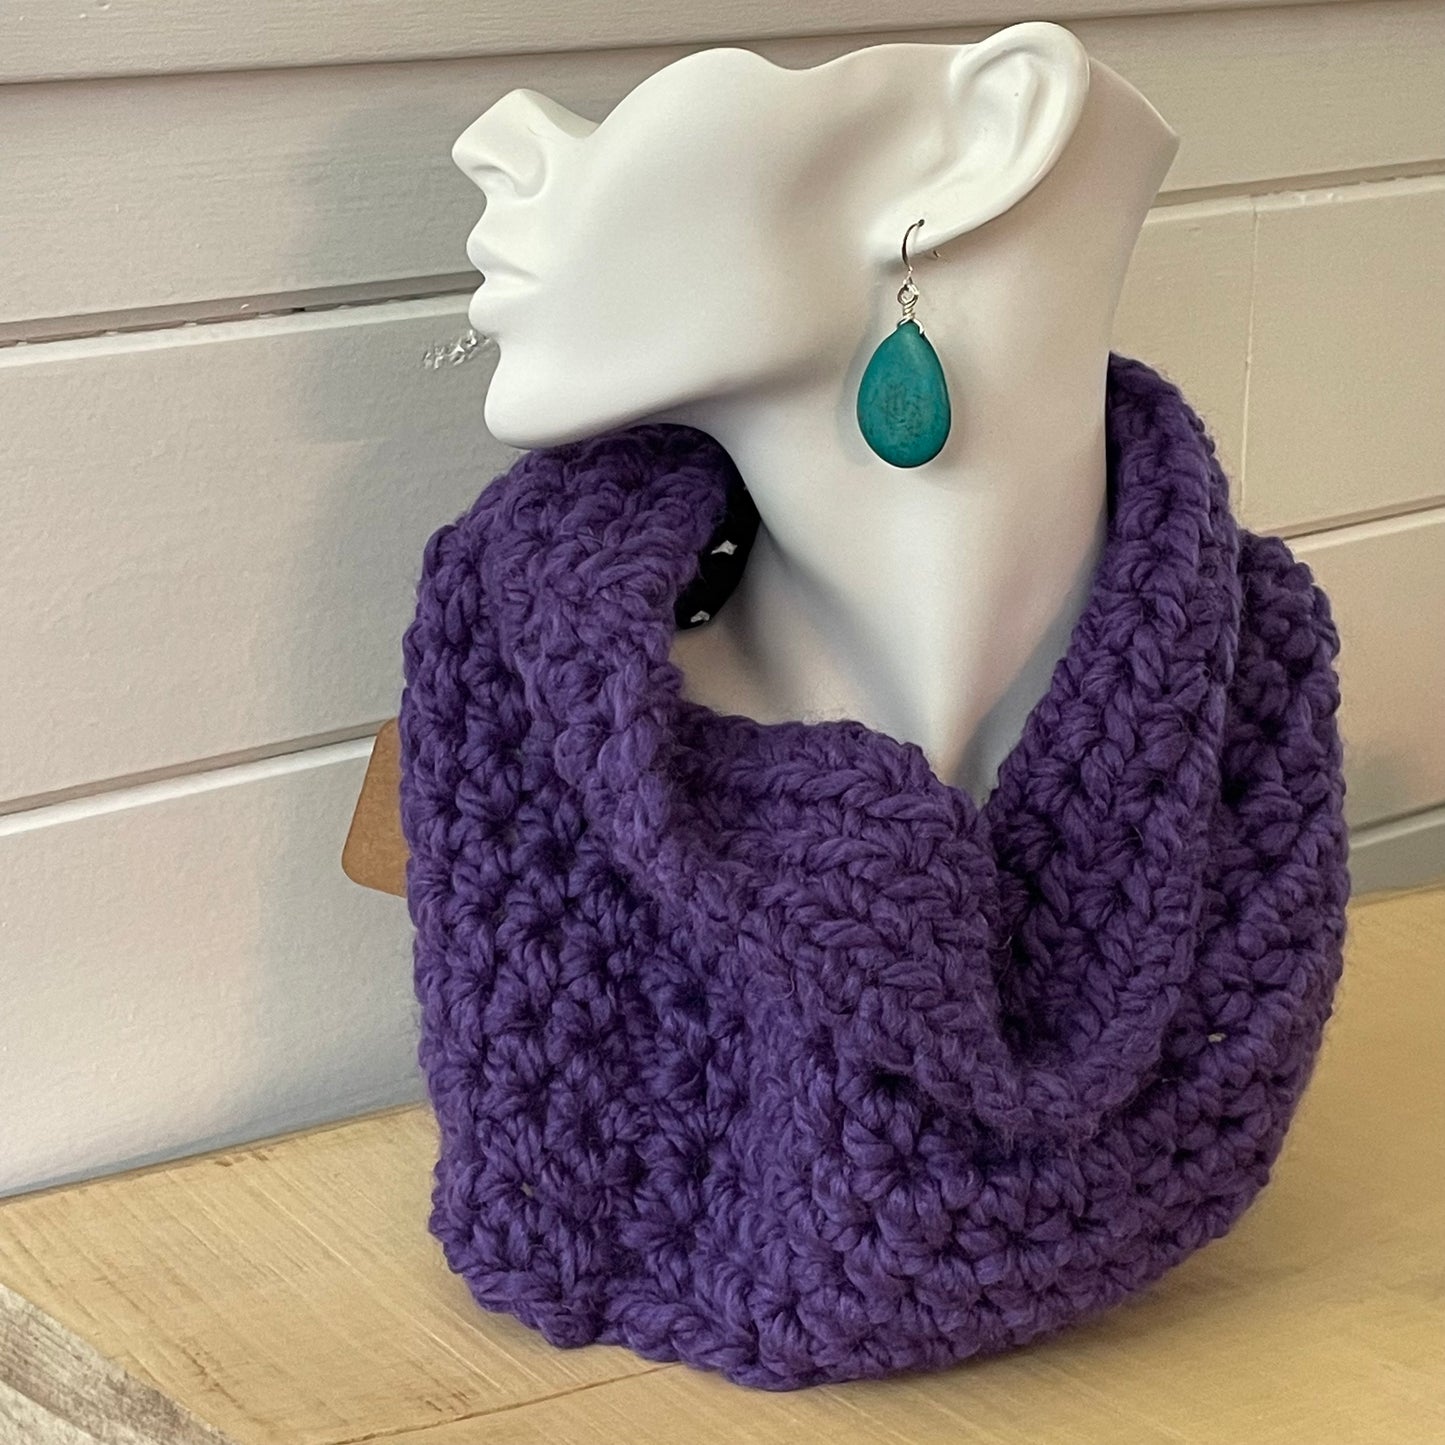 Extra Warm Hand Crocheted Purple Cowl Scarf 11" Wool Acrylic Blend Unisex Men's Women's Knit Accessory--view of scarf displayed on a solid white bust